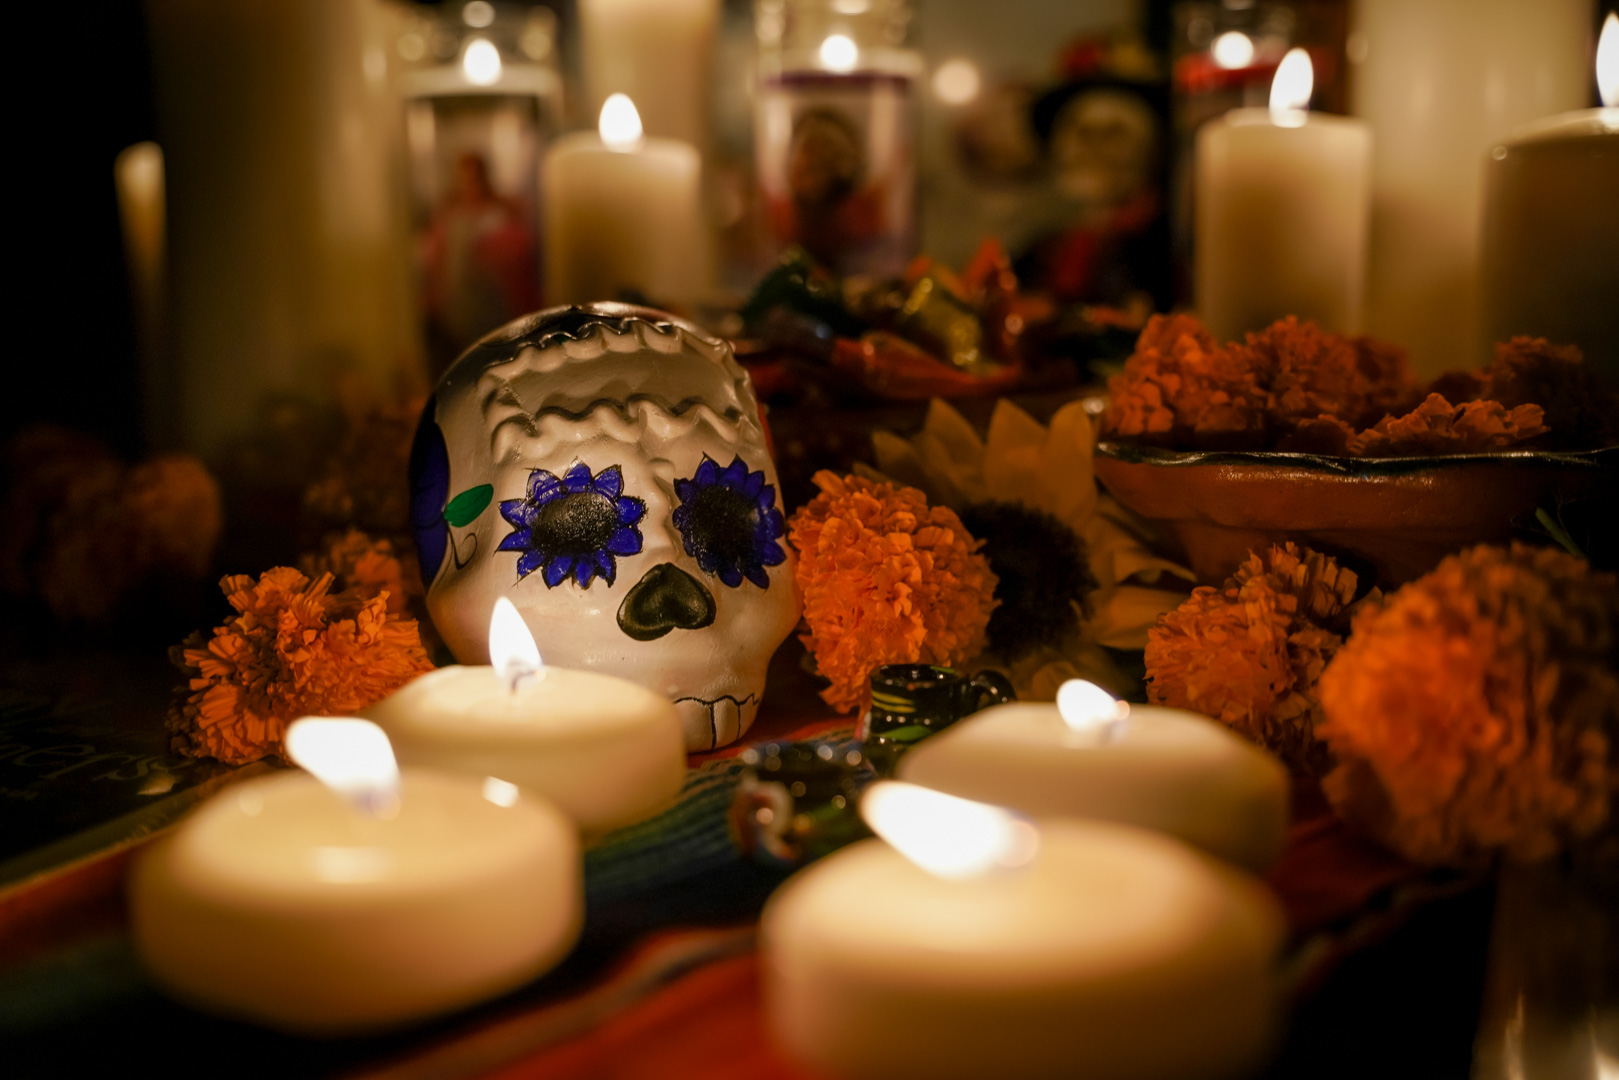 A sugar skull surrounded by candles